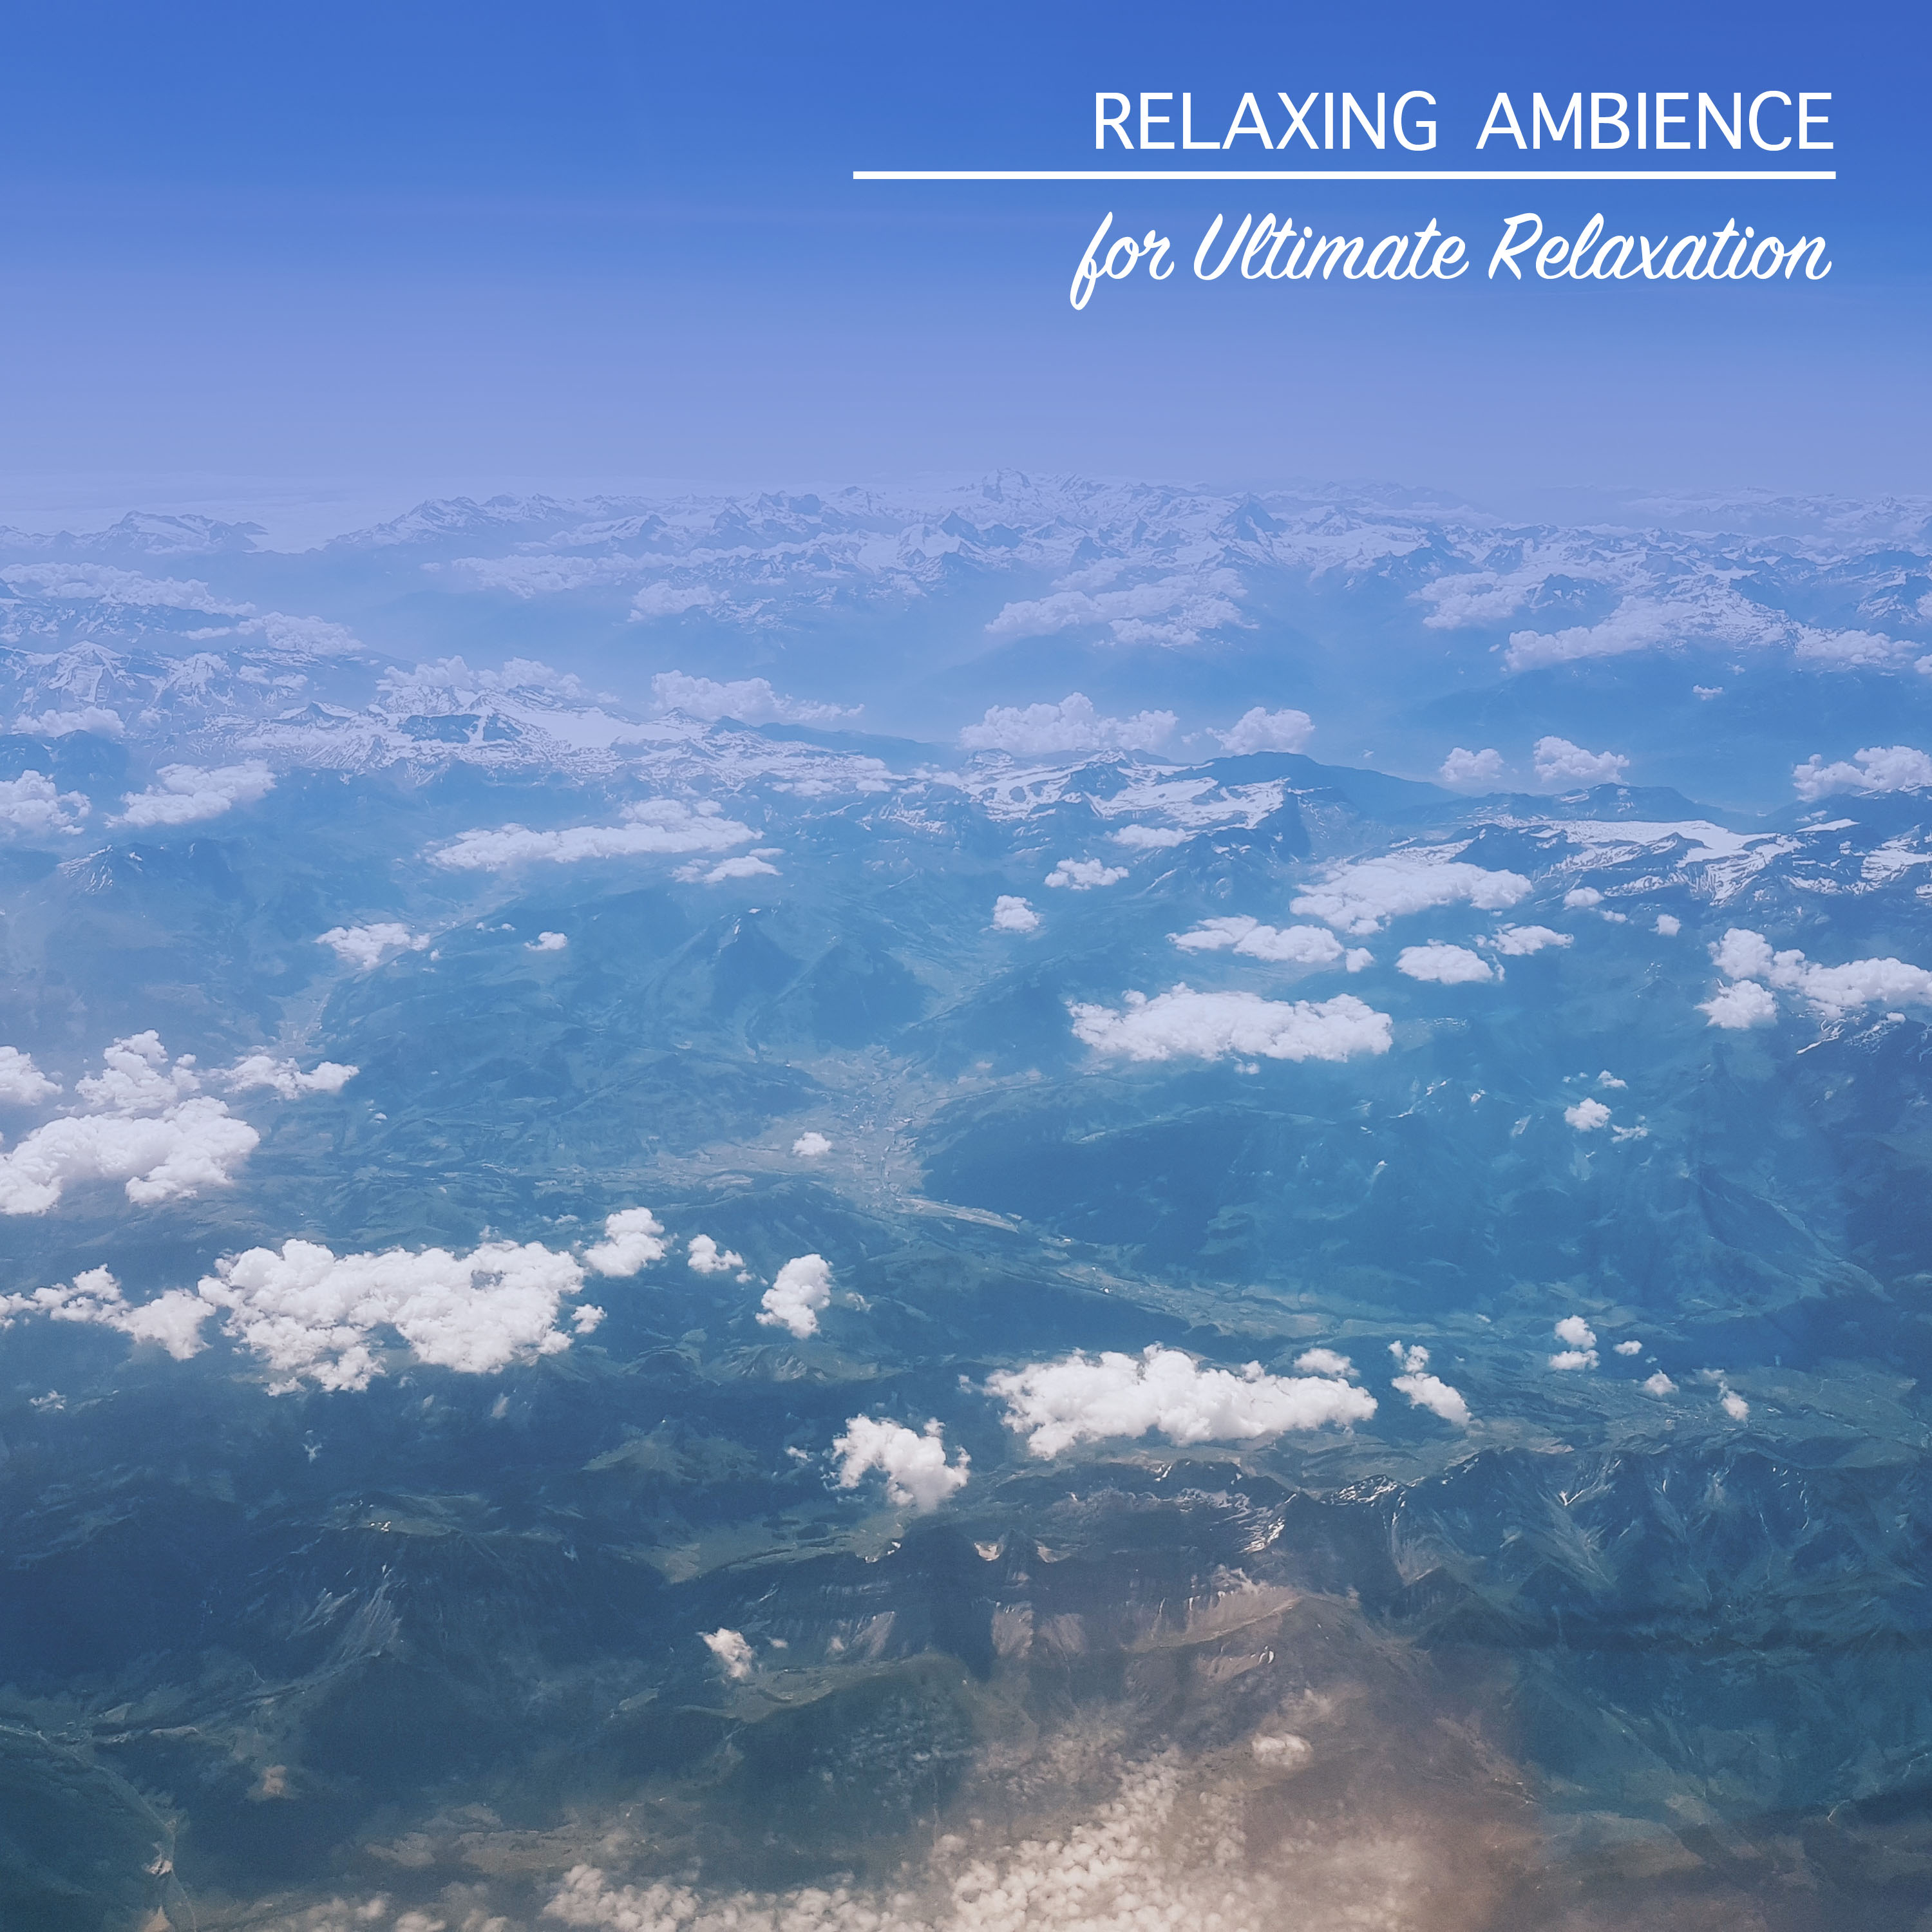 20 Relaxing Ambience Songs for Ultimate Relaxation